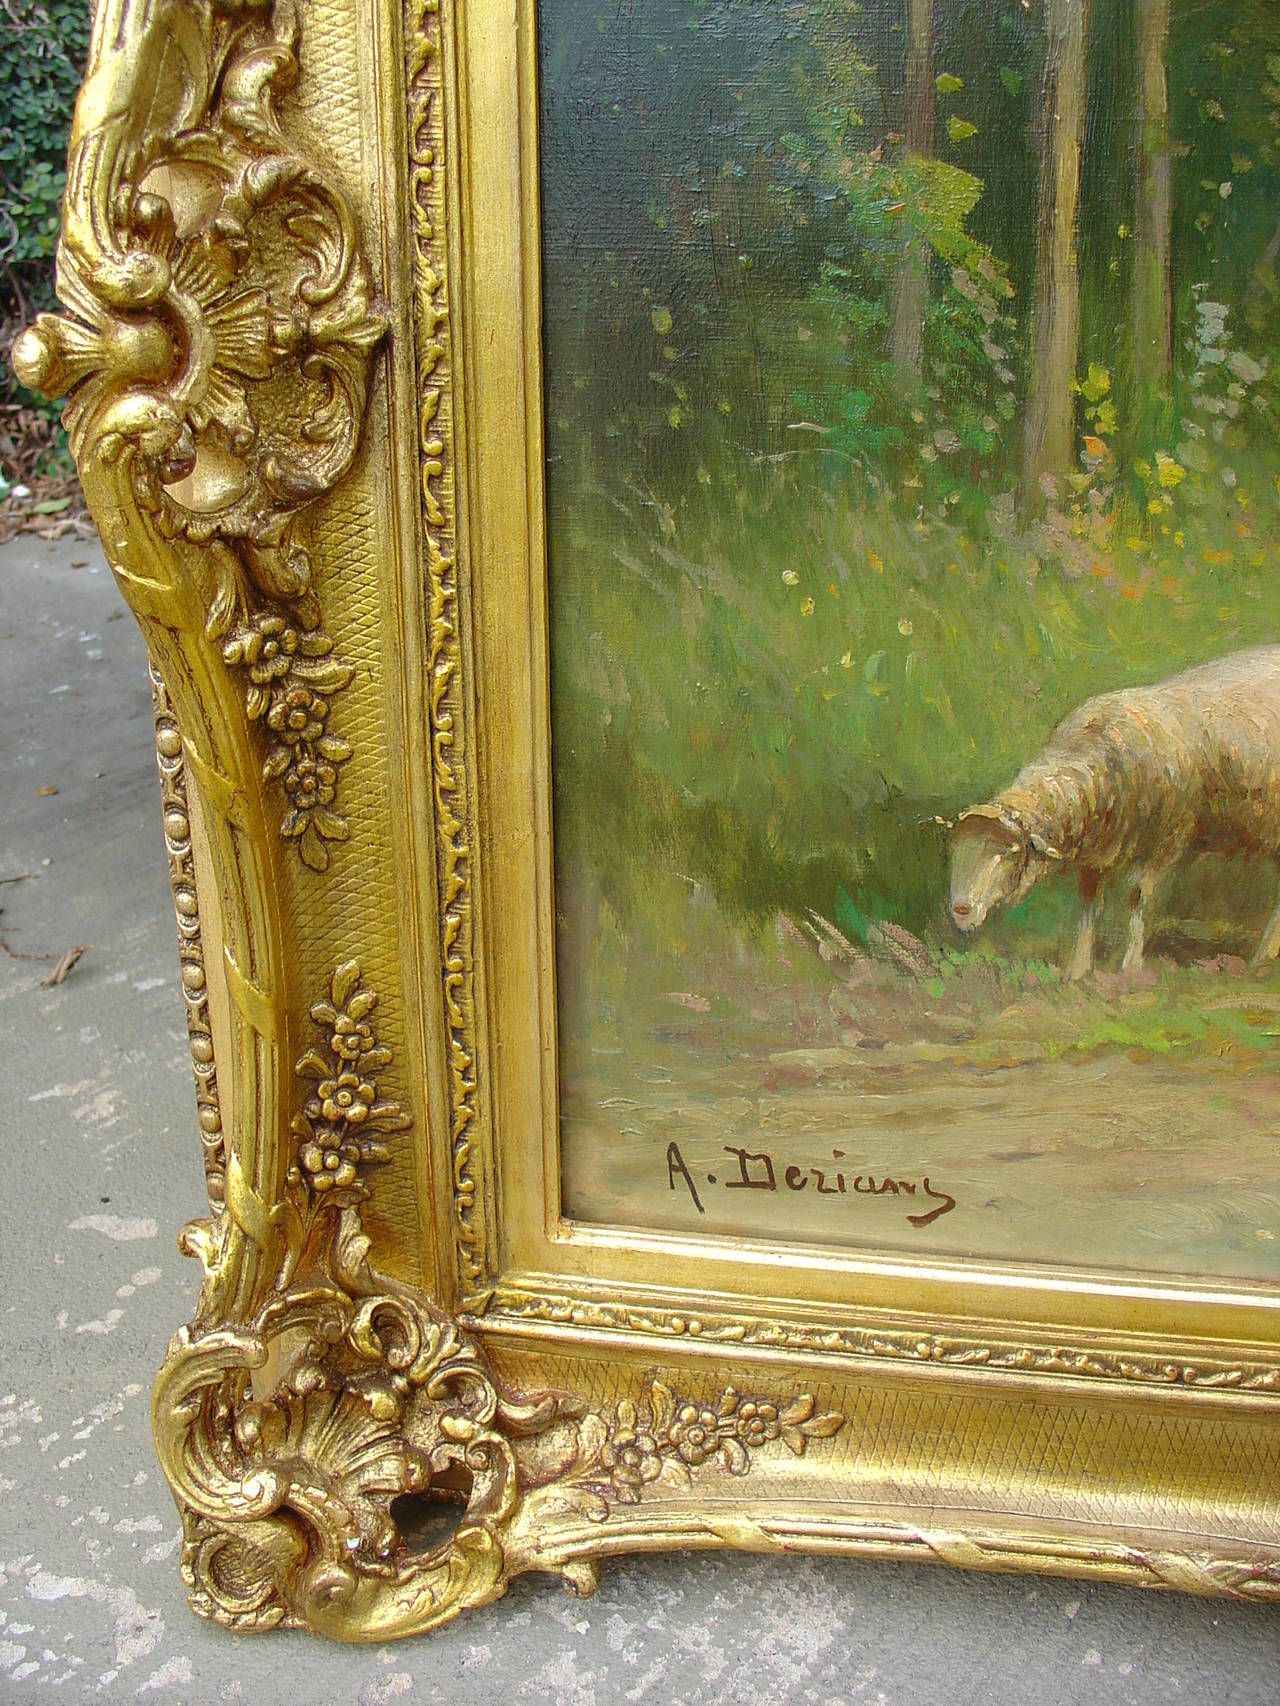 This signed antique French oil on canvas painting (signed lower left A. Derians) depicts a peaceful pastoral scene featuring a sheepherder, his flock, and his dog. They appear to be in a pasture following a somewhat worn path surrounded by trees on